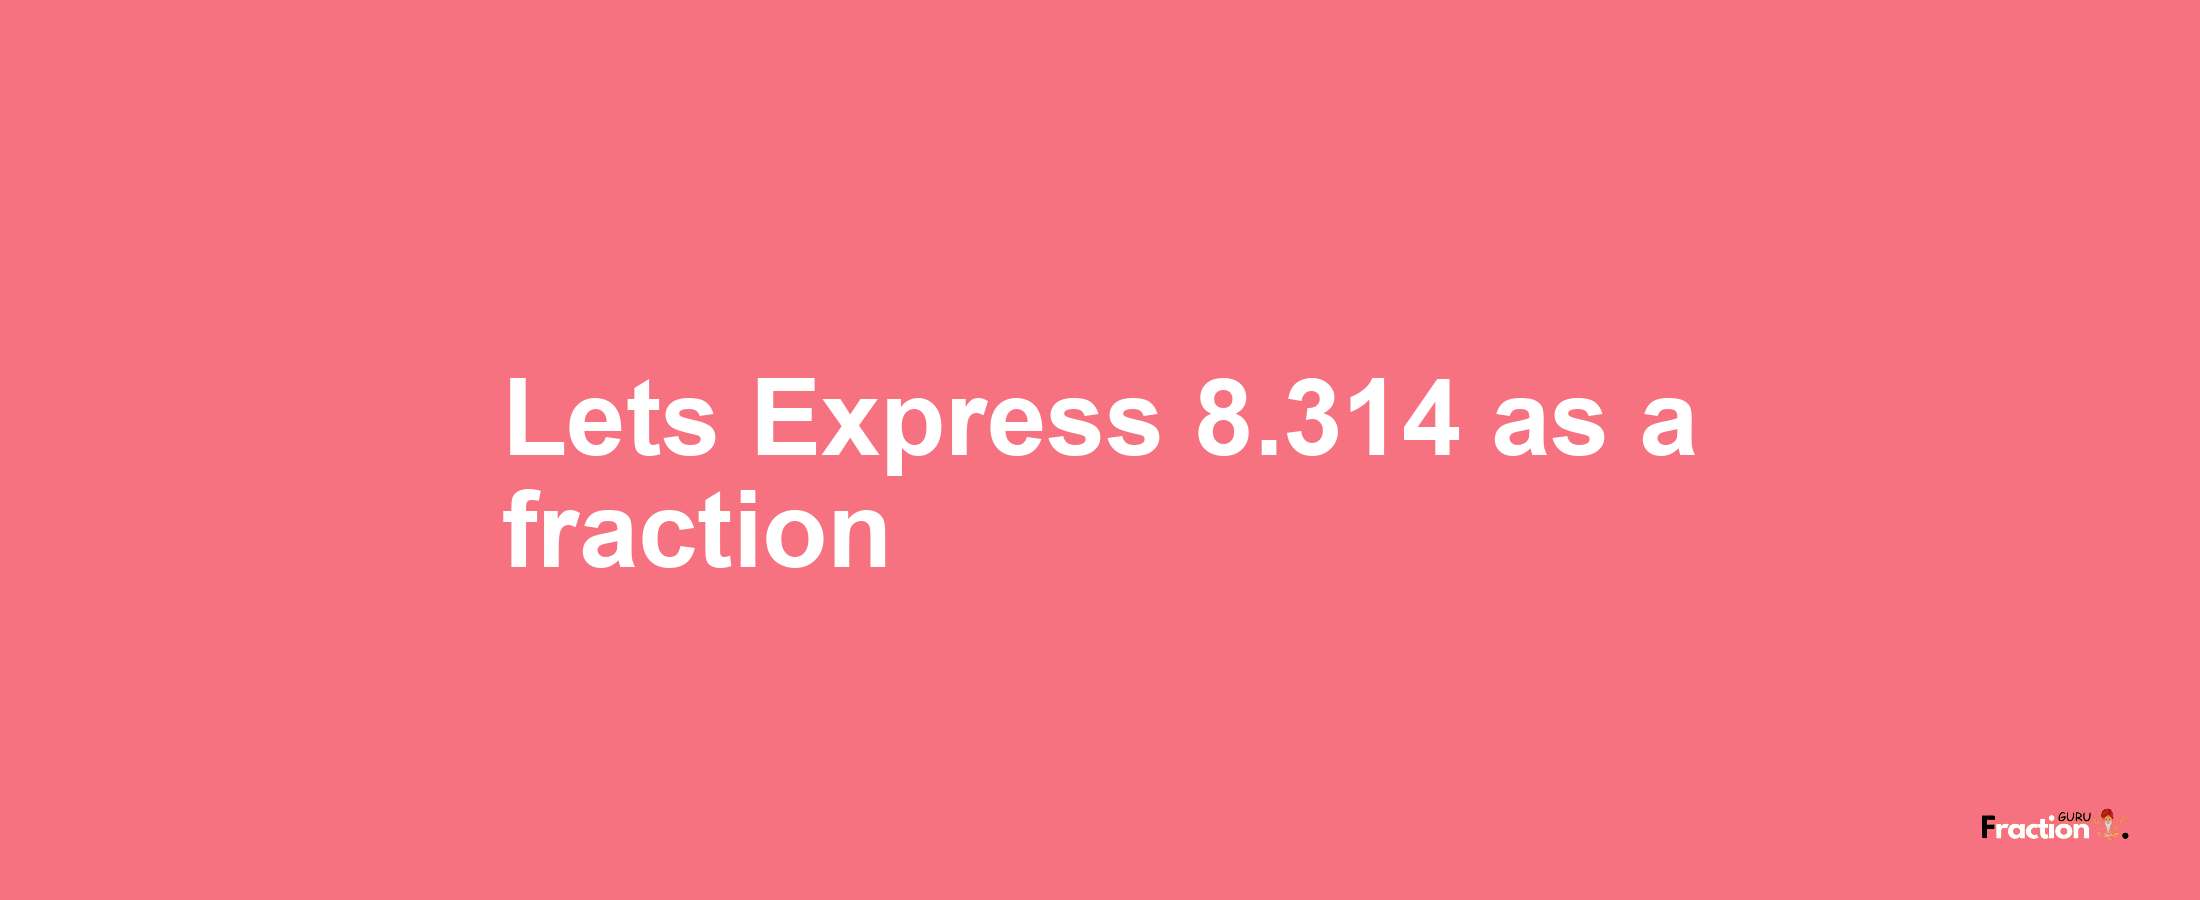 Lets Express 8.314 as afraction